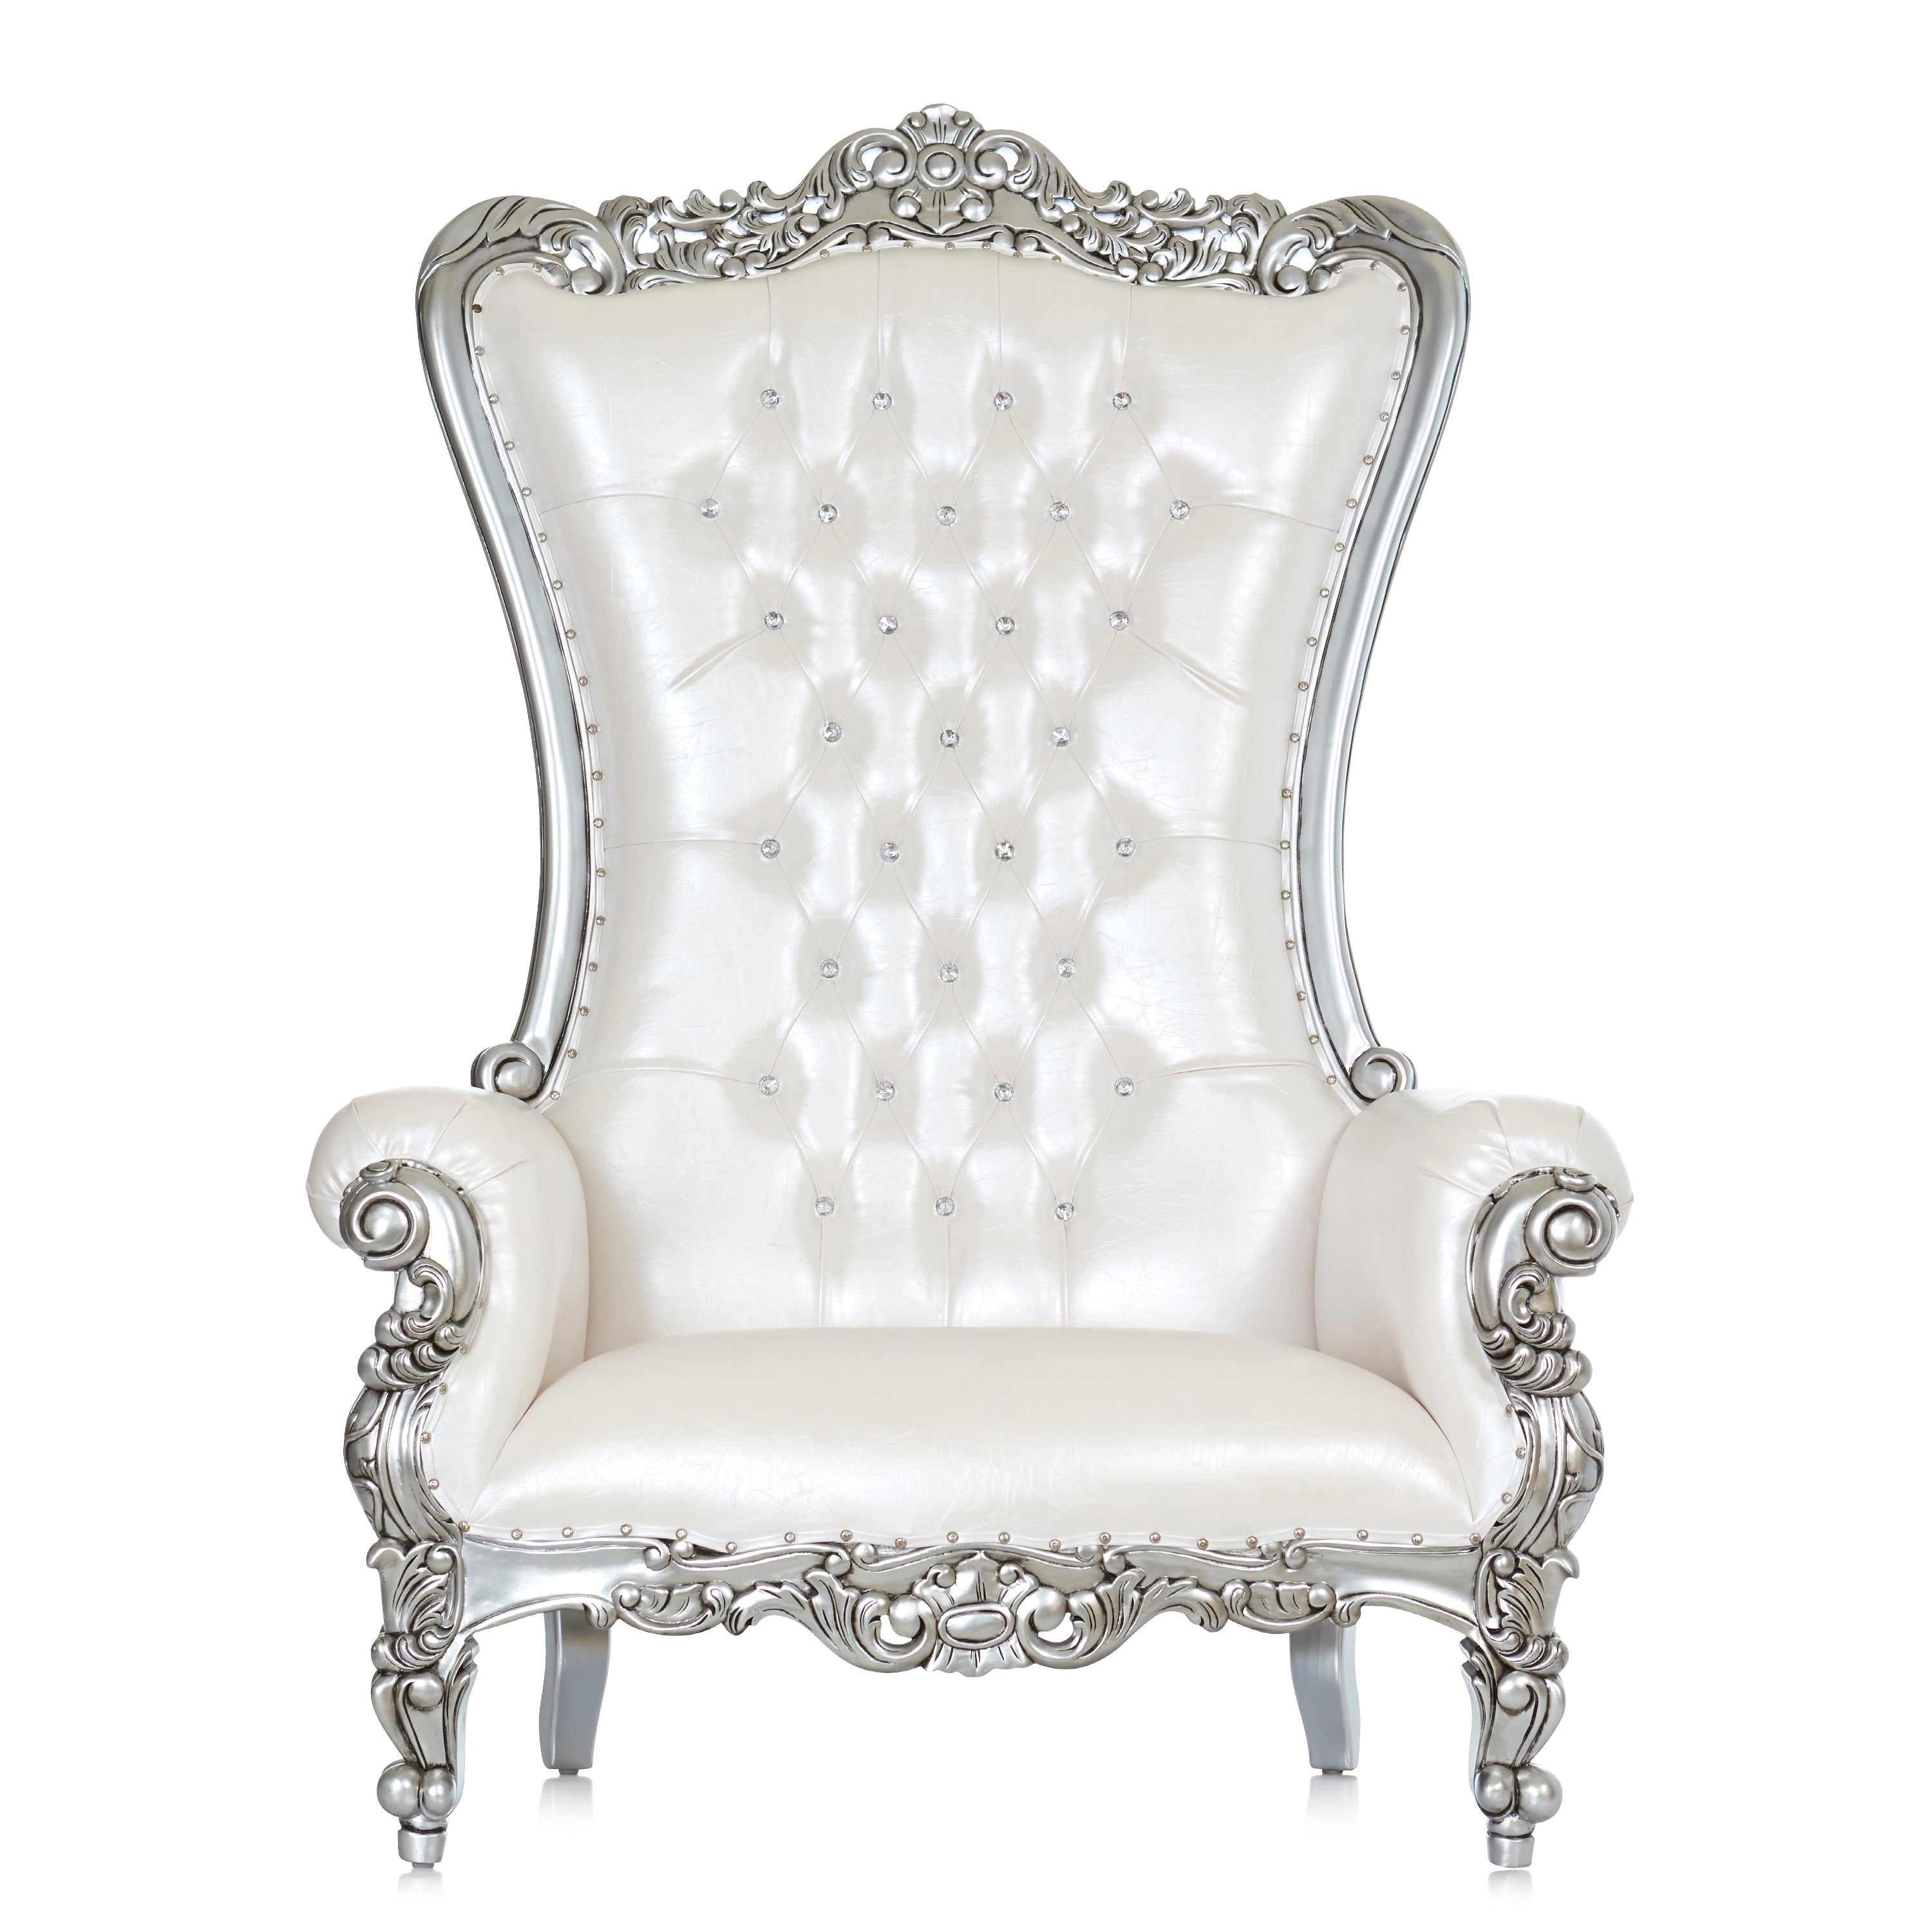 "queen tiffany" extra wide throne chair  white  silver